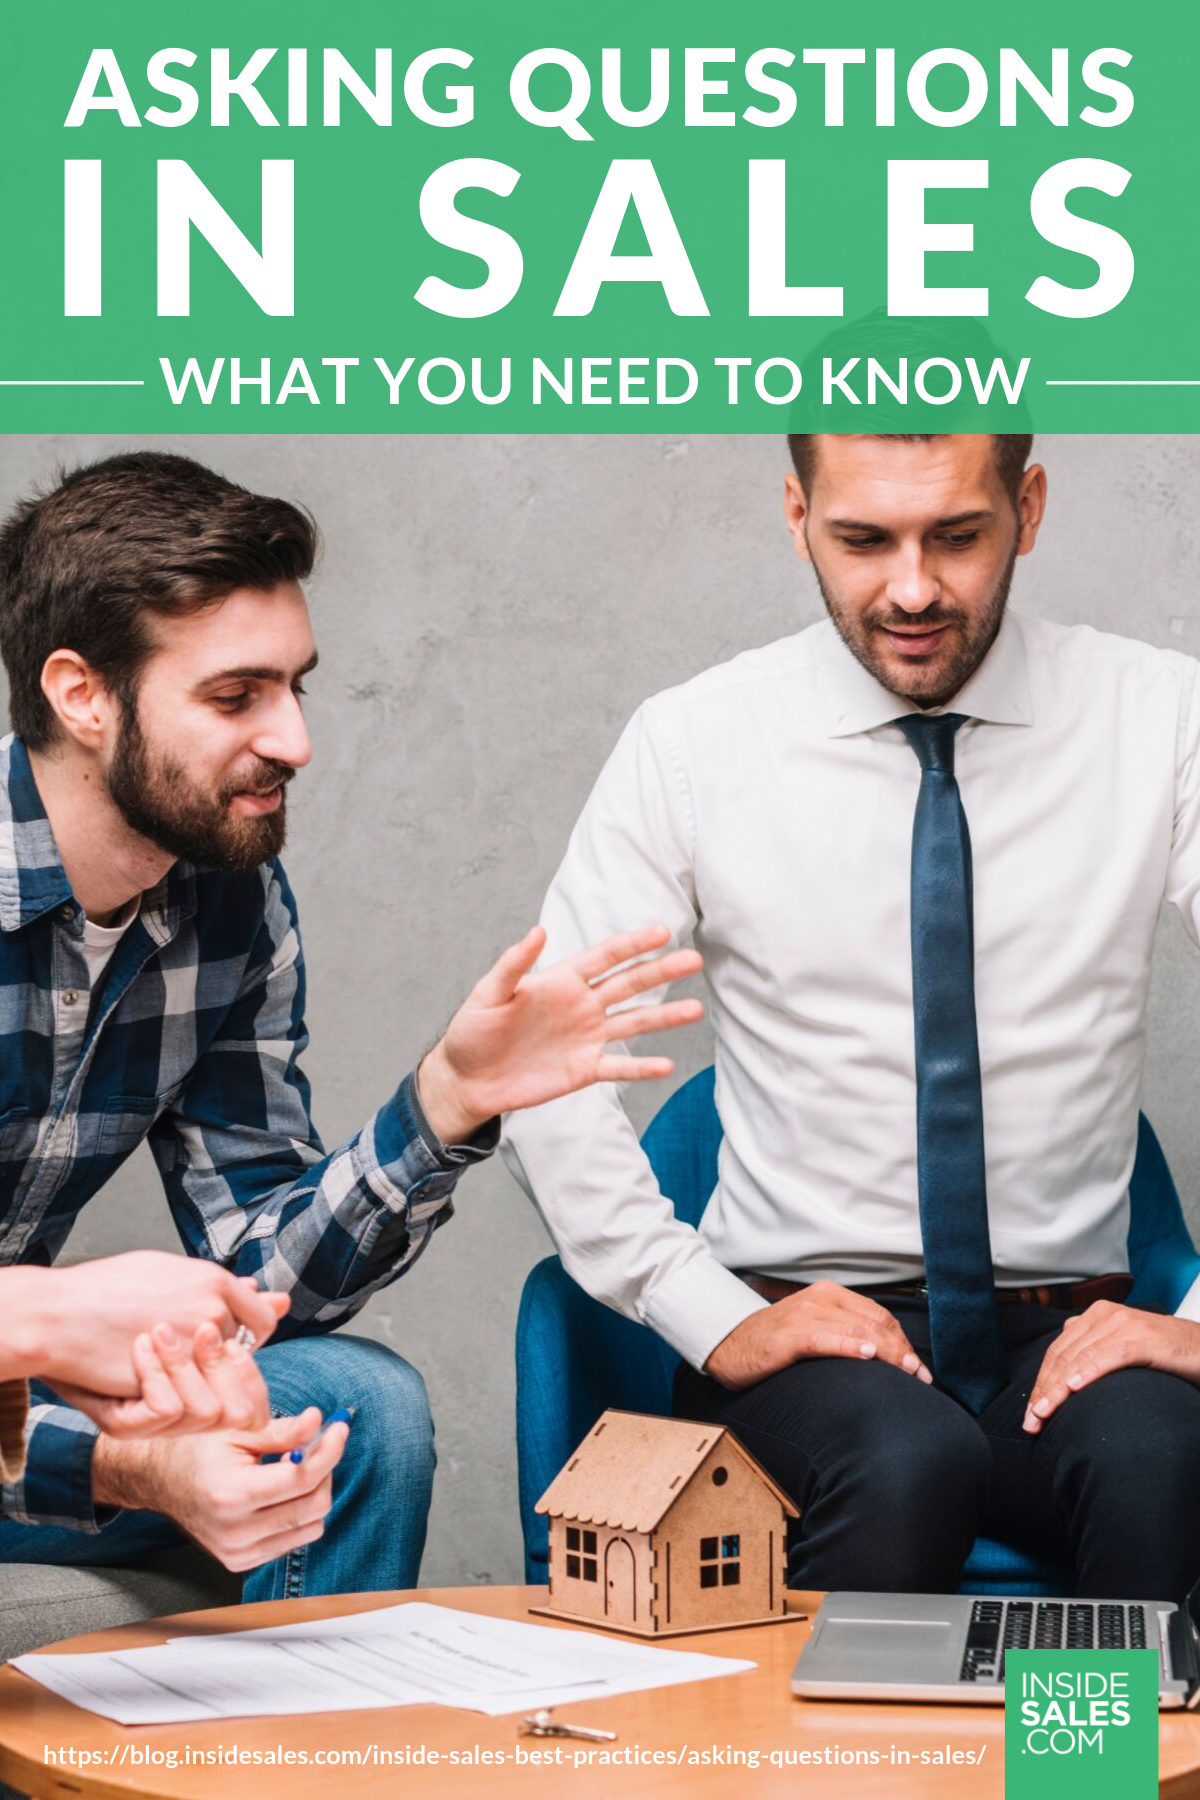 Why Asking Questions in Sales is Important https://resources.insidesales.com/blog/inside-sales-best-practices/asking-questions-in-sales/